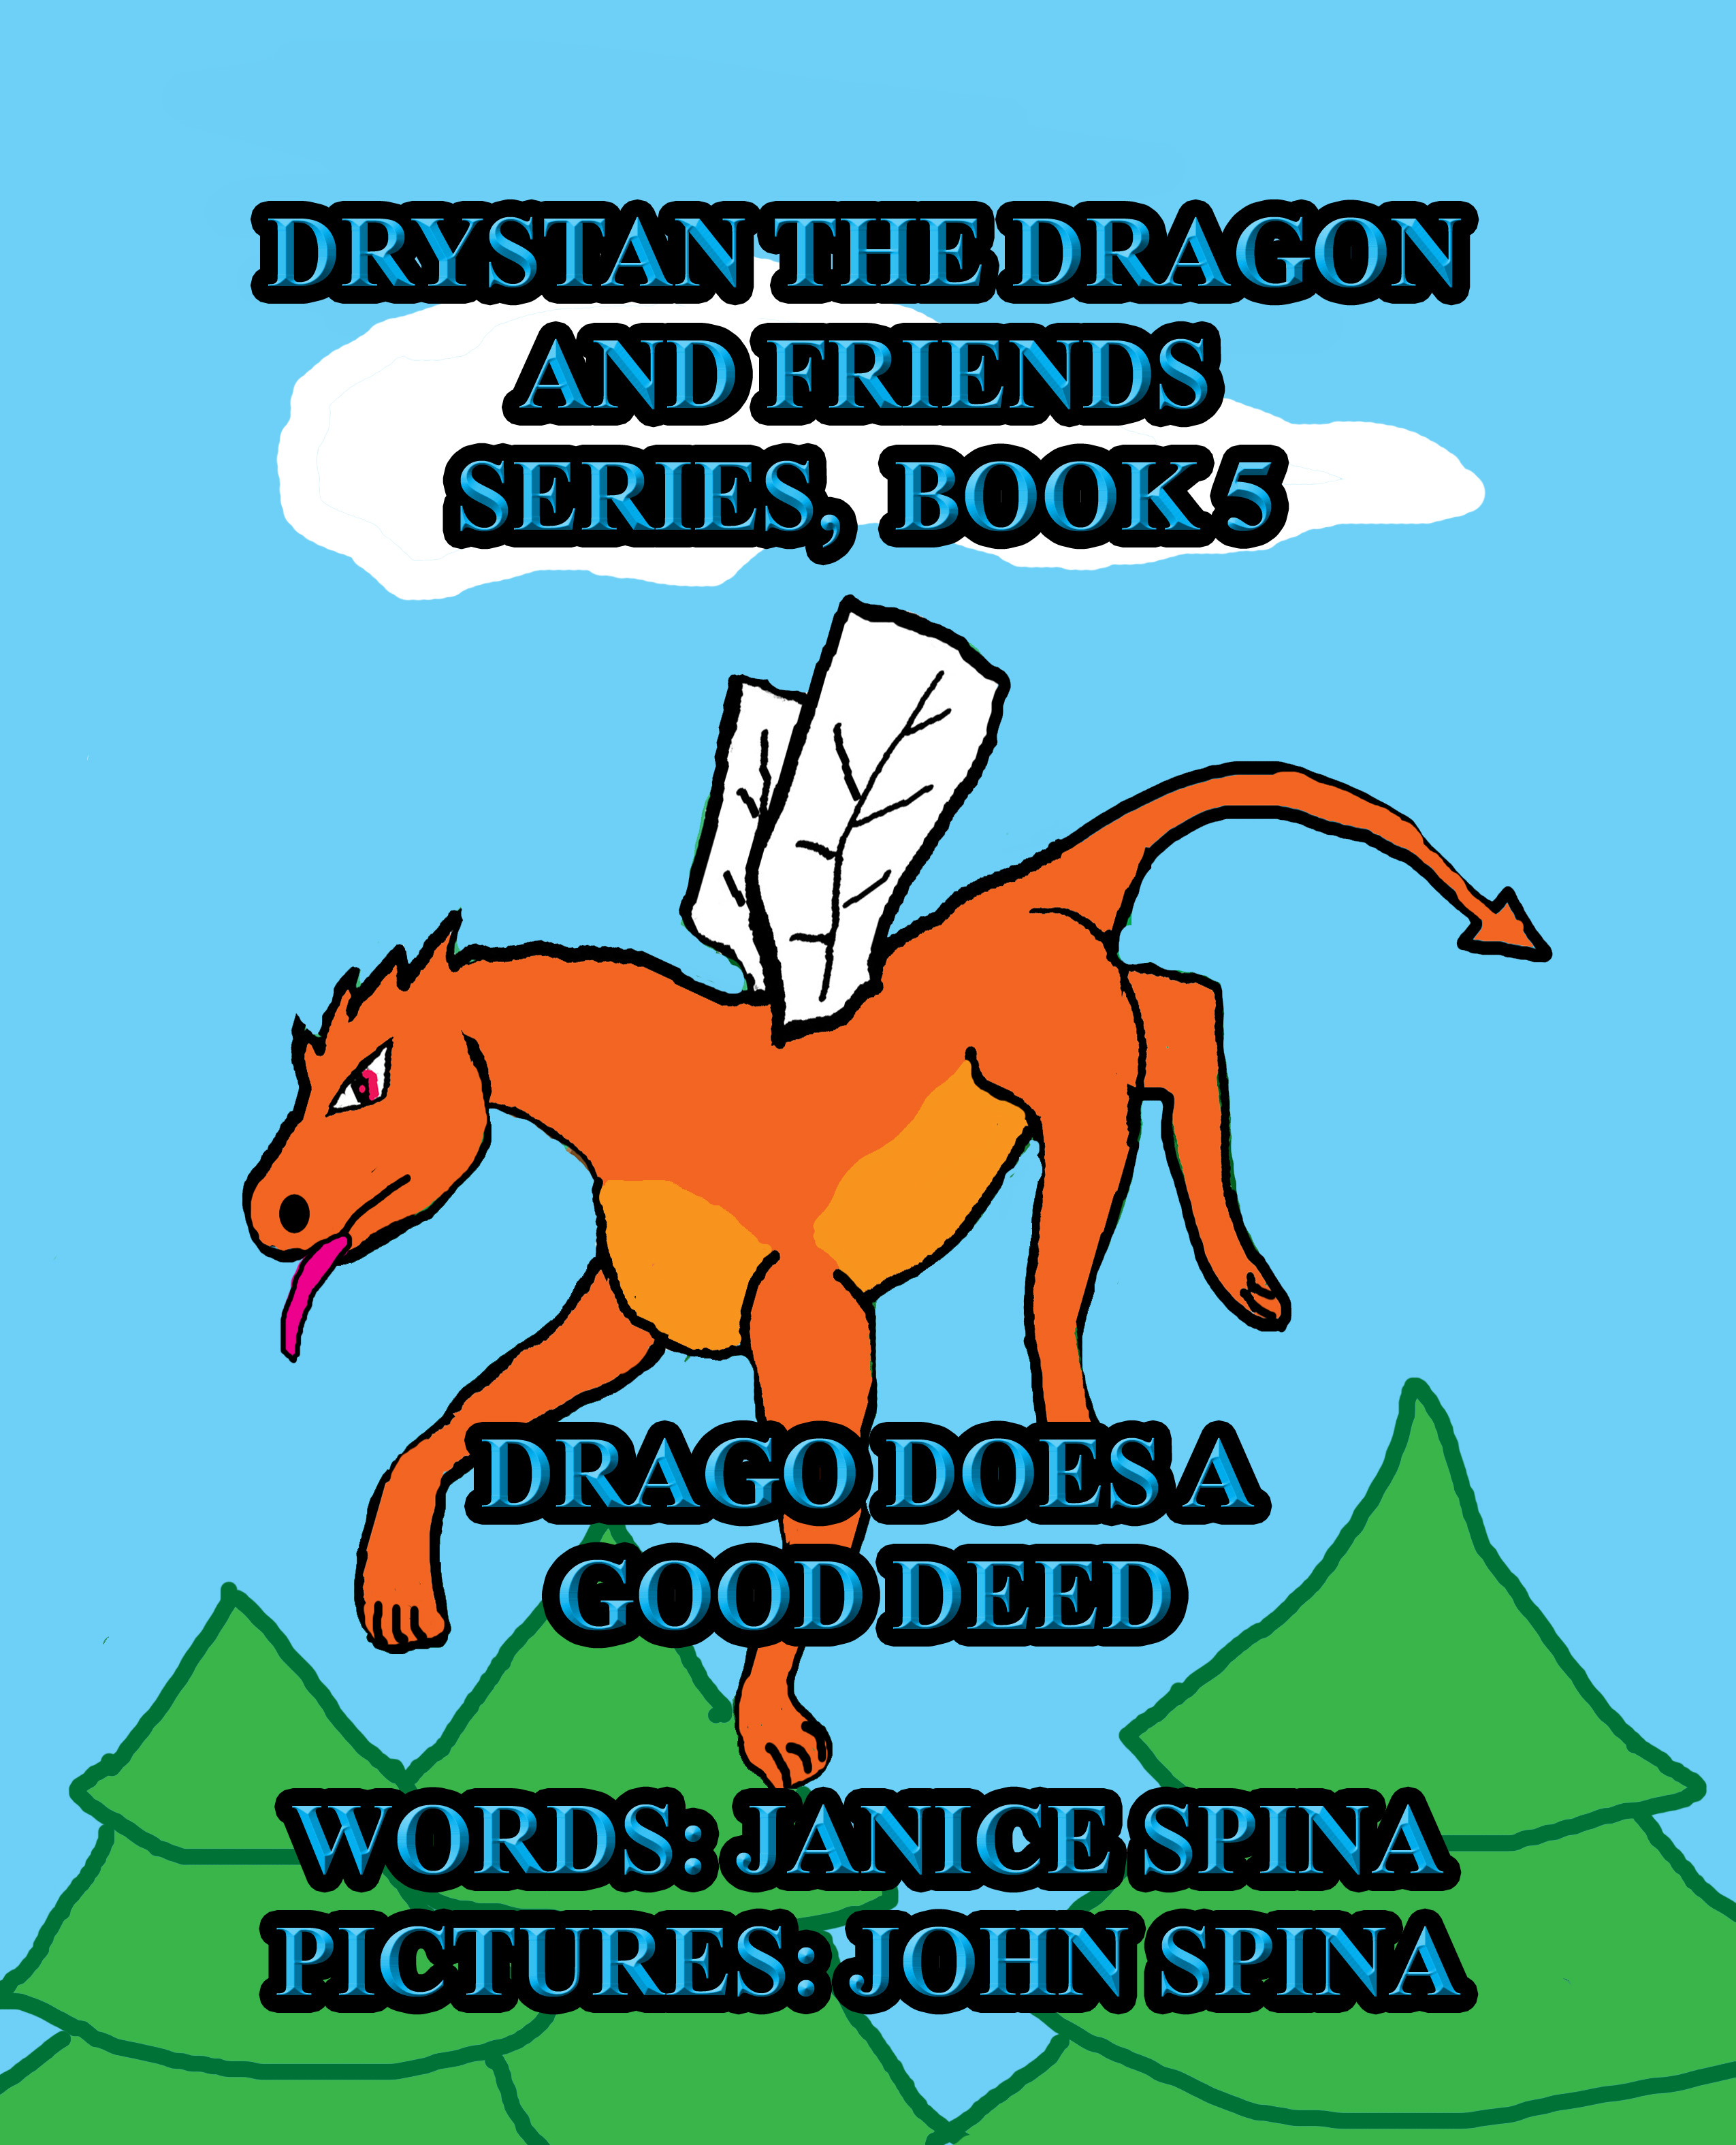 Drystan the Dragon and Friends Series, Book 5: Drago Does A Good Deed